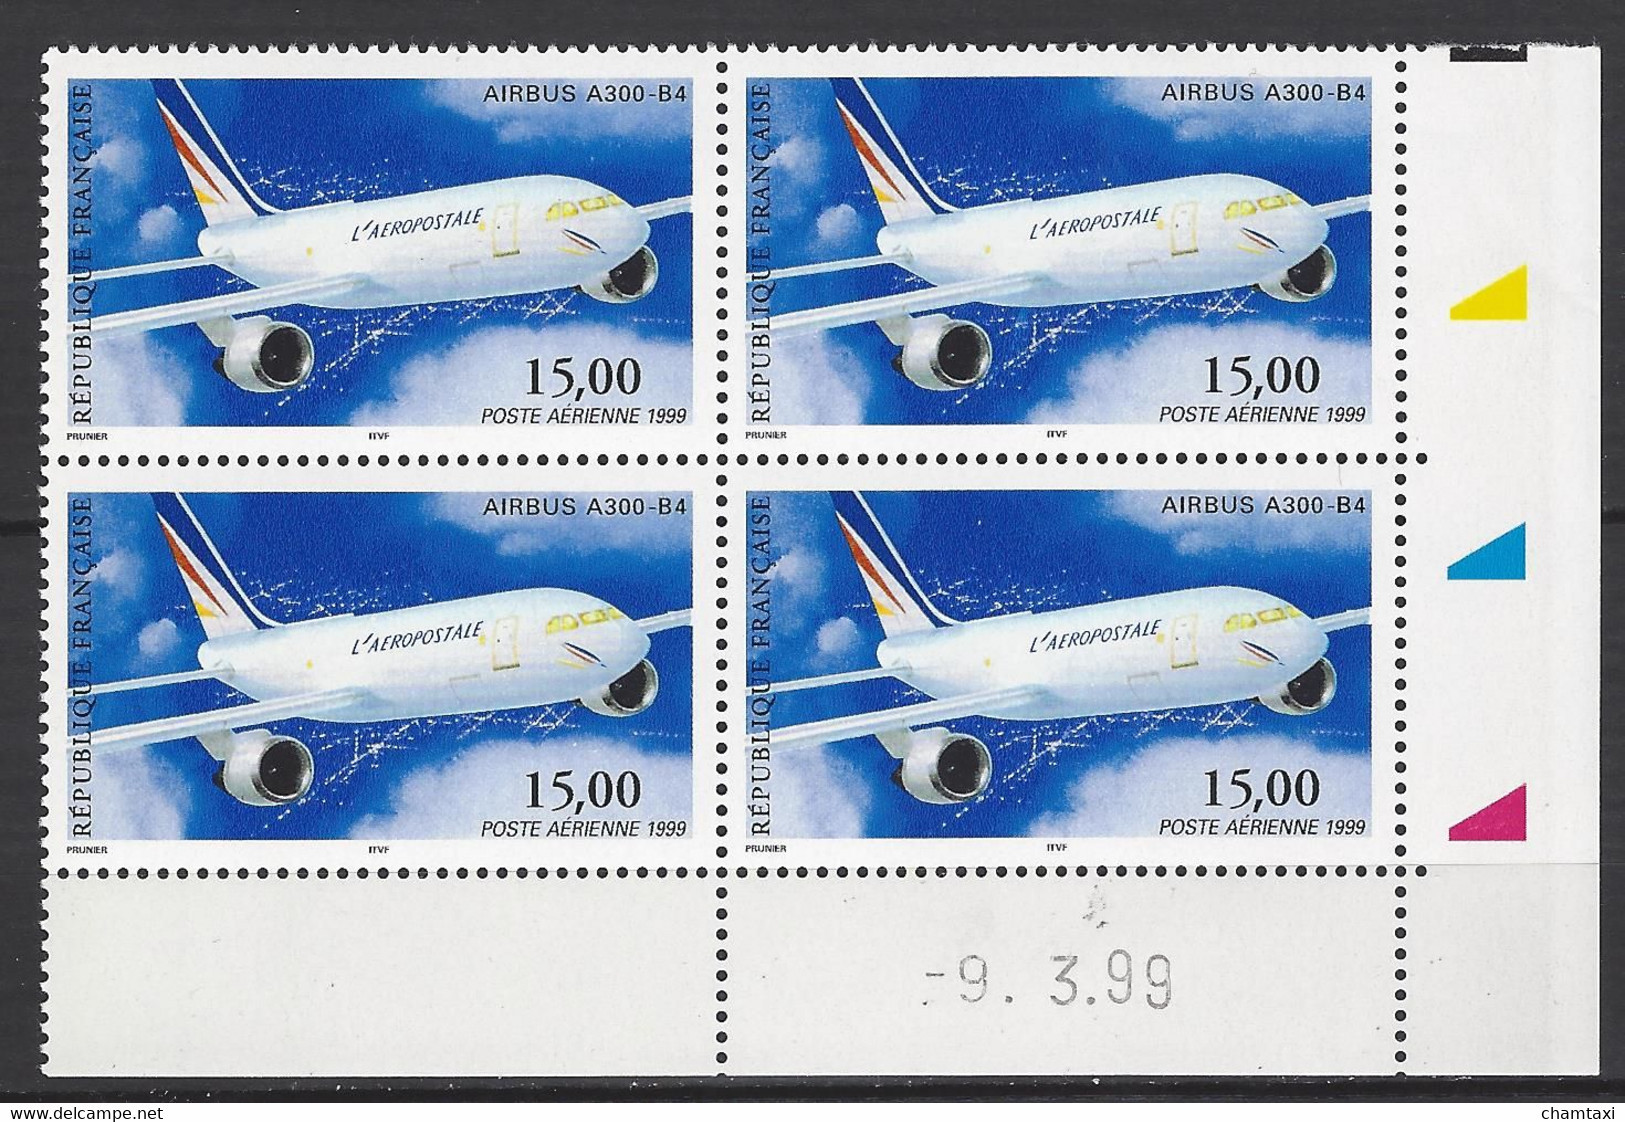 CD PA 63 FRANCE 1999 TIMBRE POSTE AERIENNE 63 AIRBUS A 300 B4  COIN DATE 63 : 9 / 3 / 99 - Posta Aerea